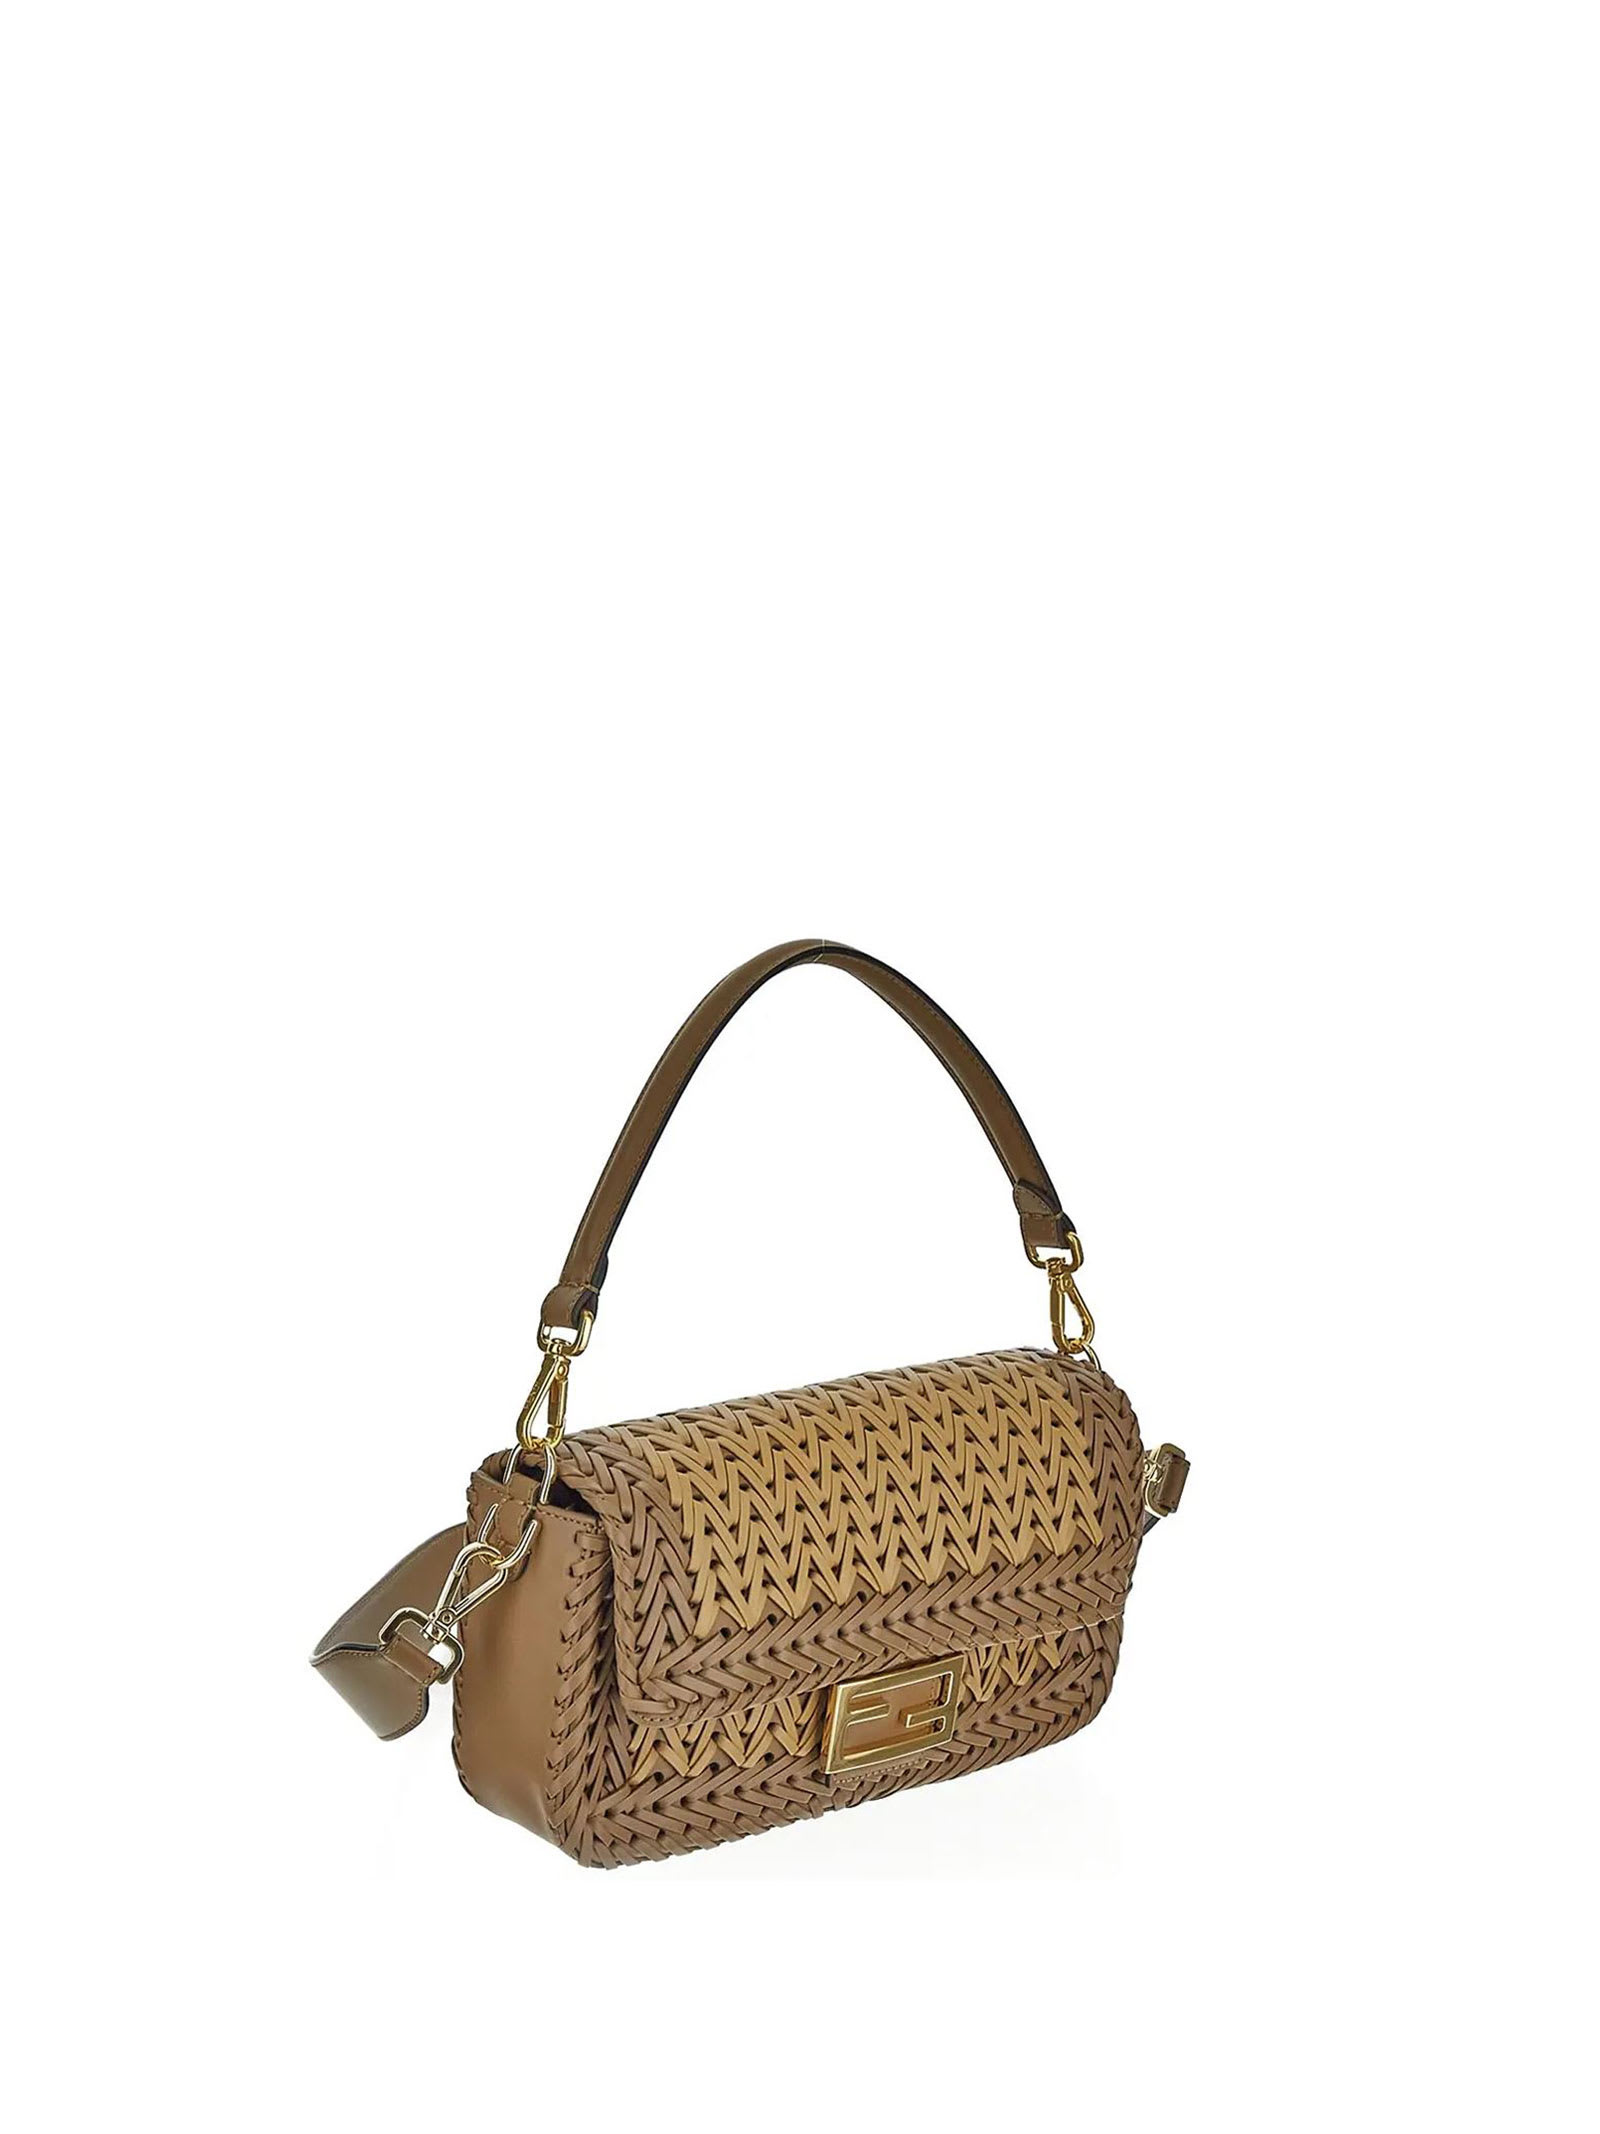 FENDI Baguette Bag with Woven Leather in Beige